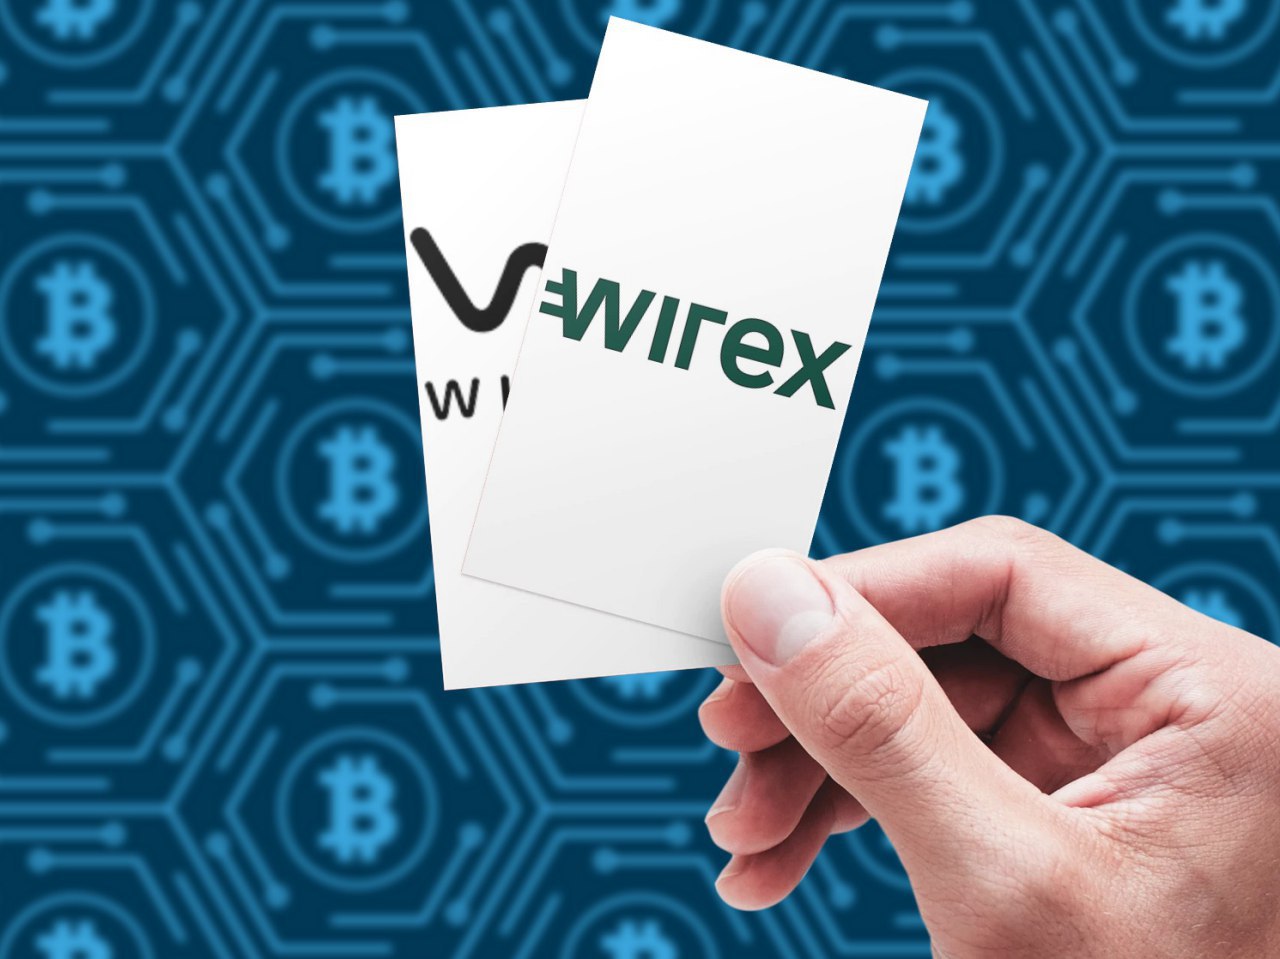 Wirex Introduces Global Crypto Accounts for Businesses